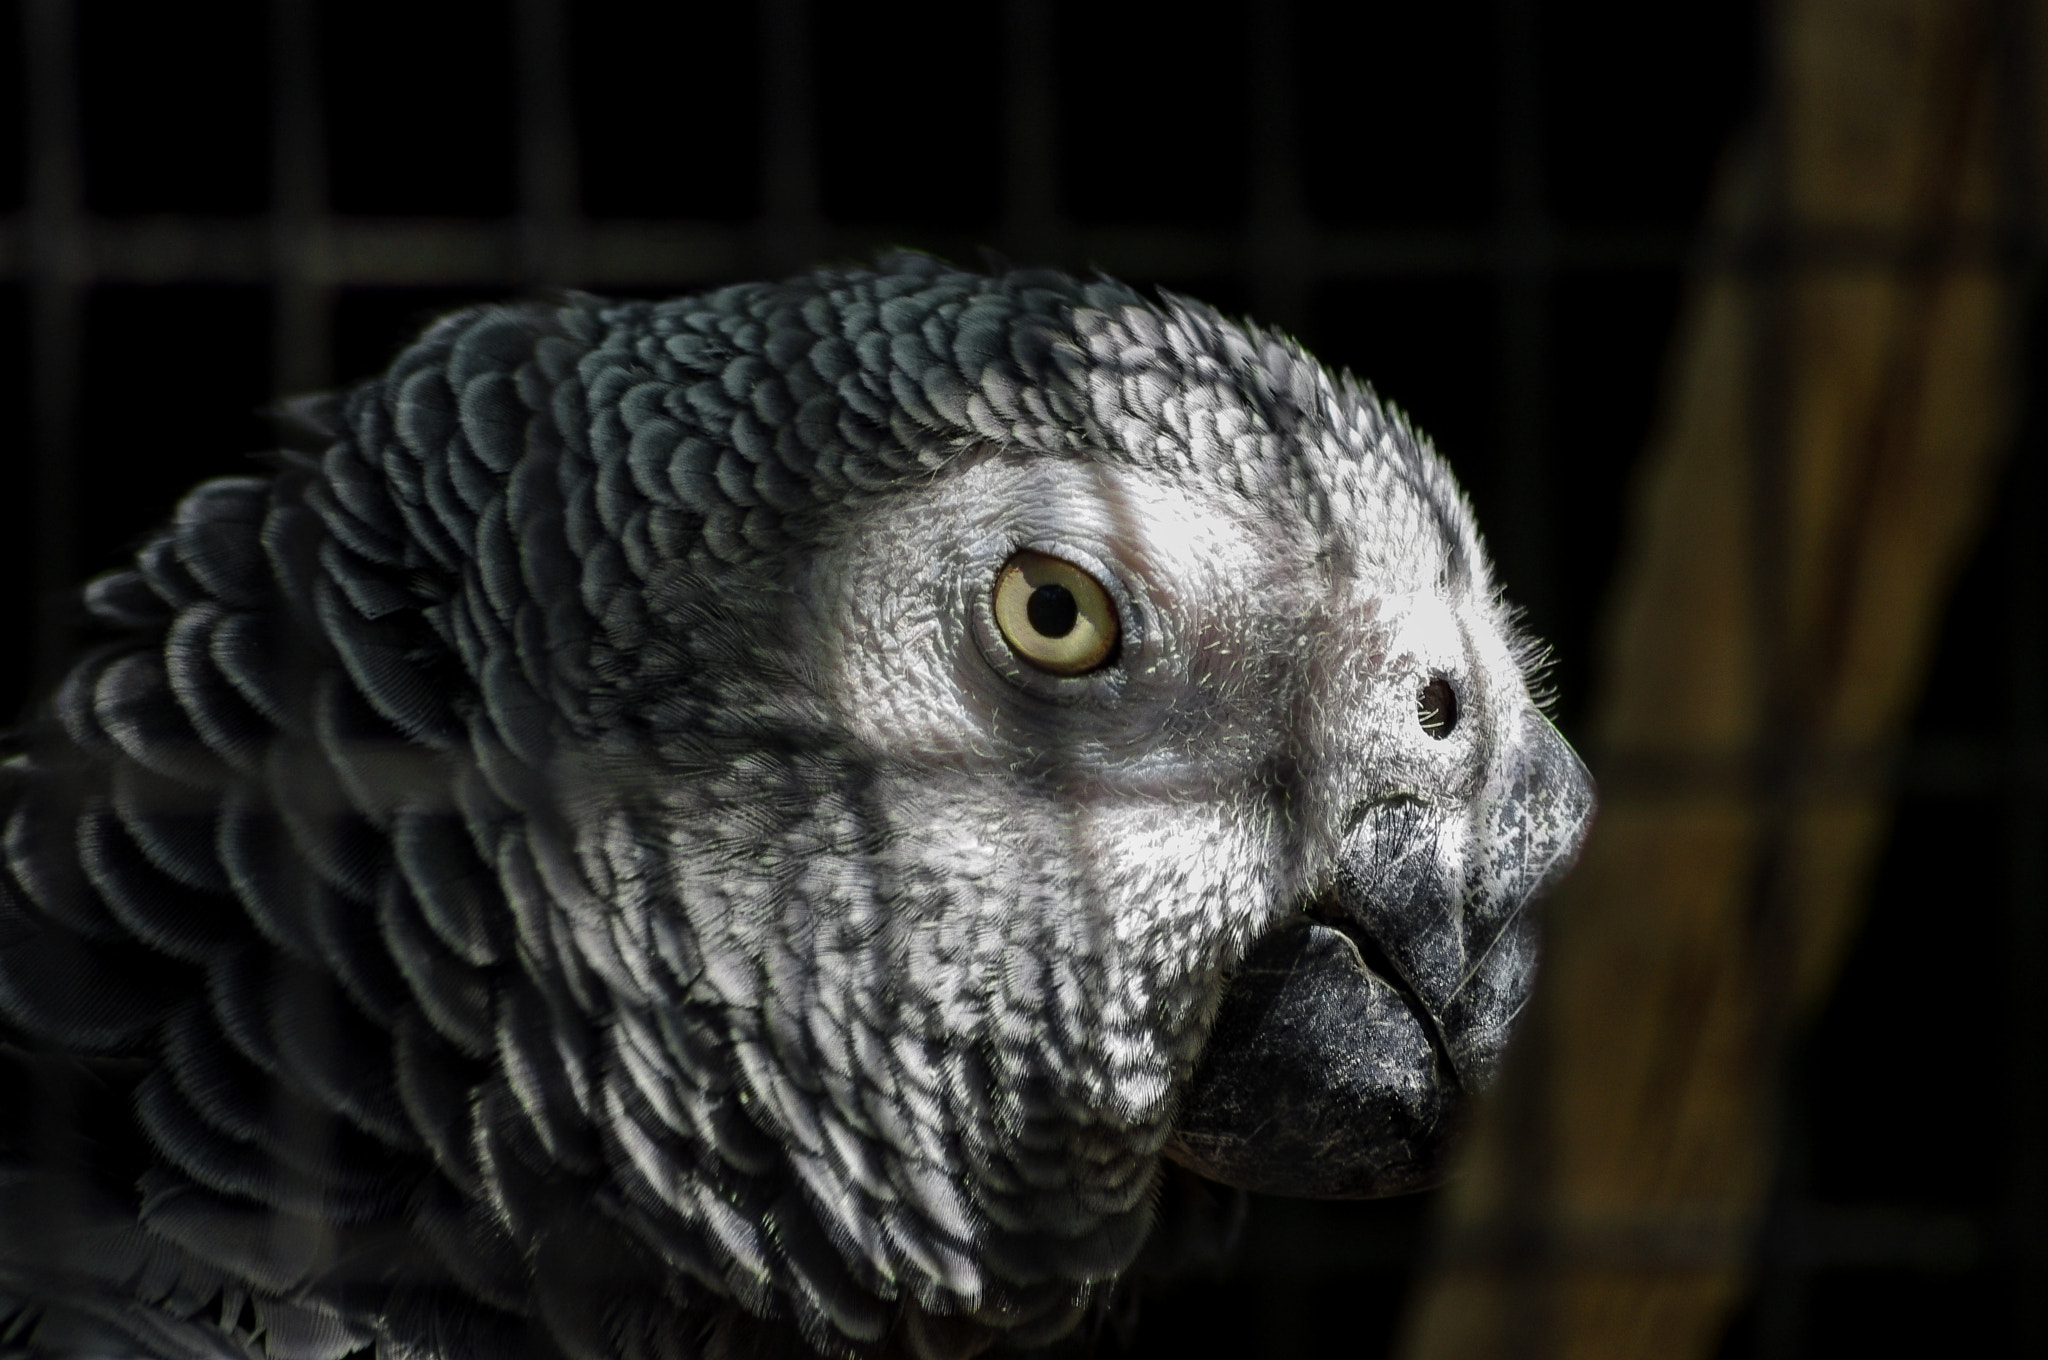 Pentax K-x + Sigma sample photo. Caged parrot photography